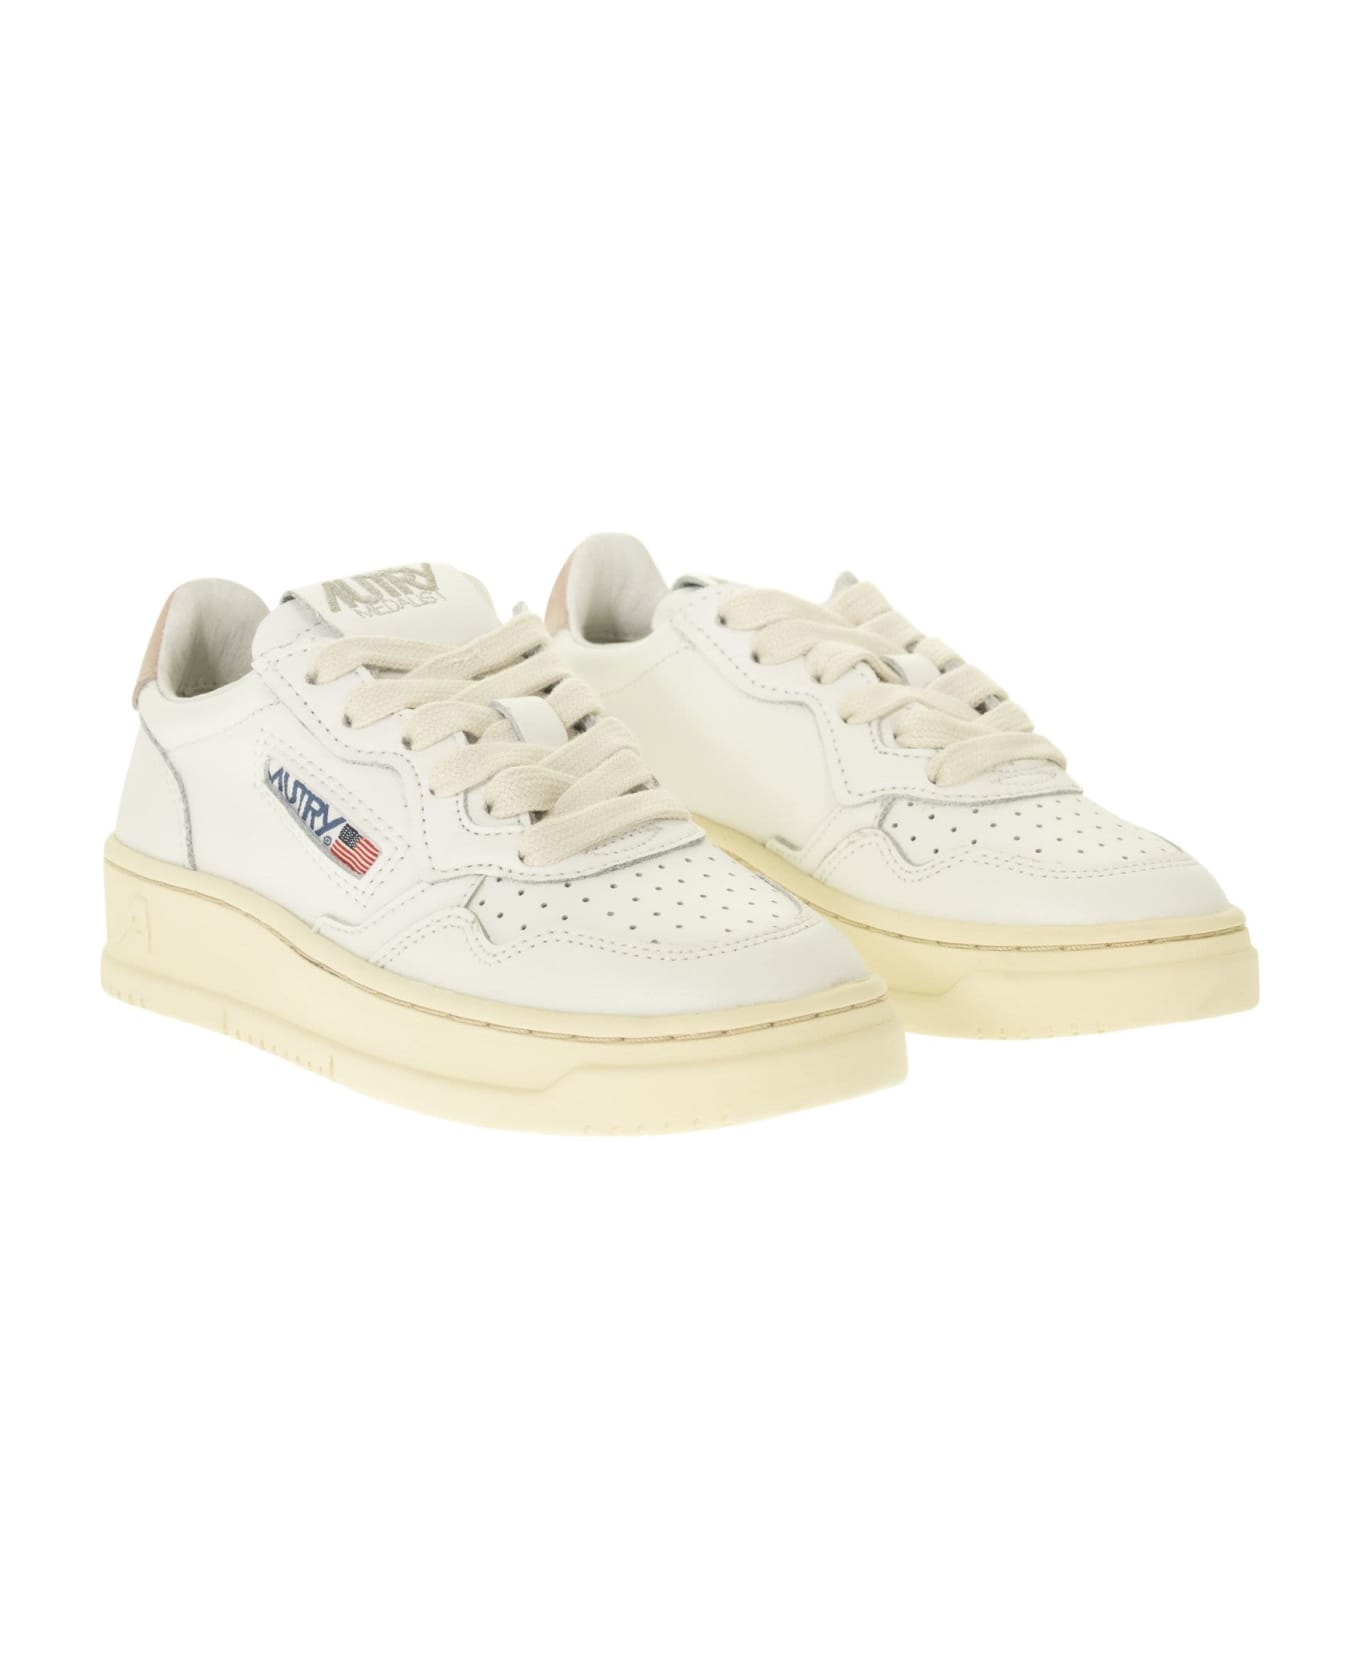 Autry Medalist Low - Leather Sneakers - White/pink シューズ